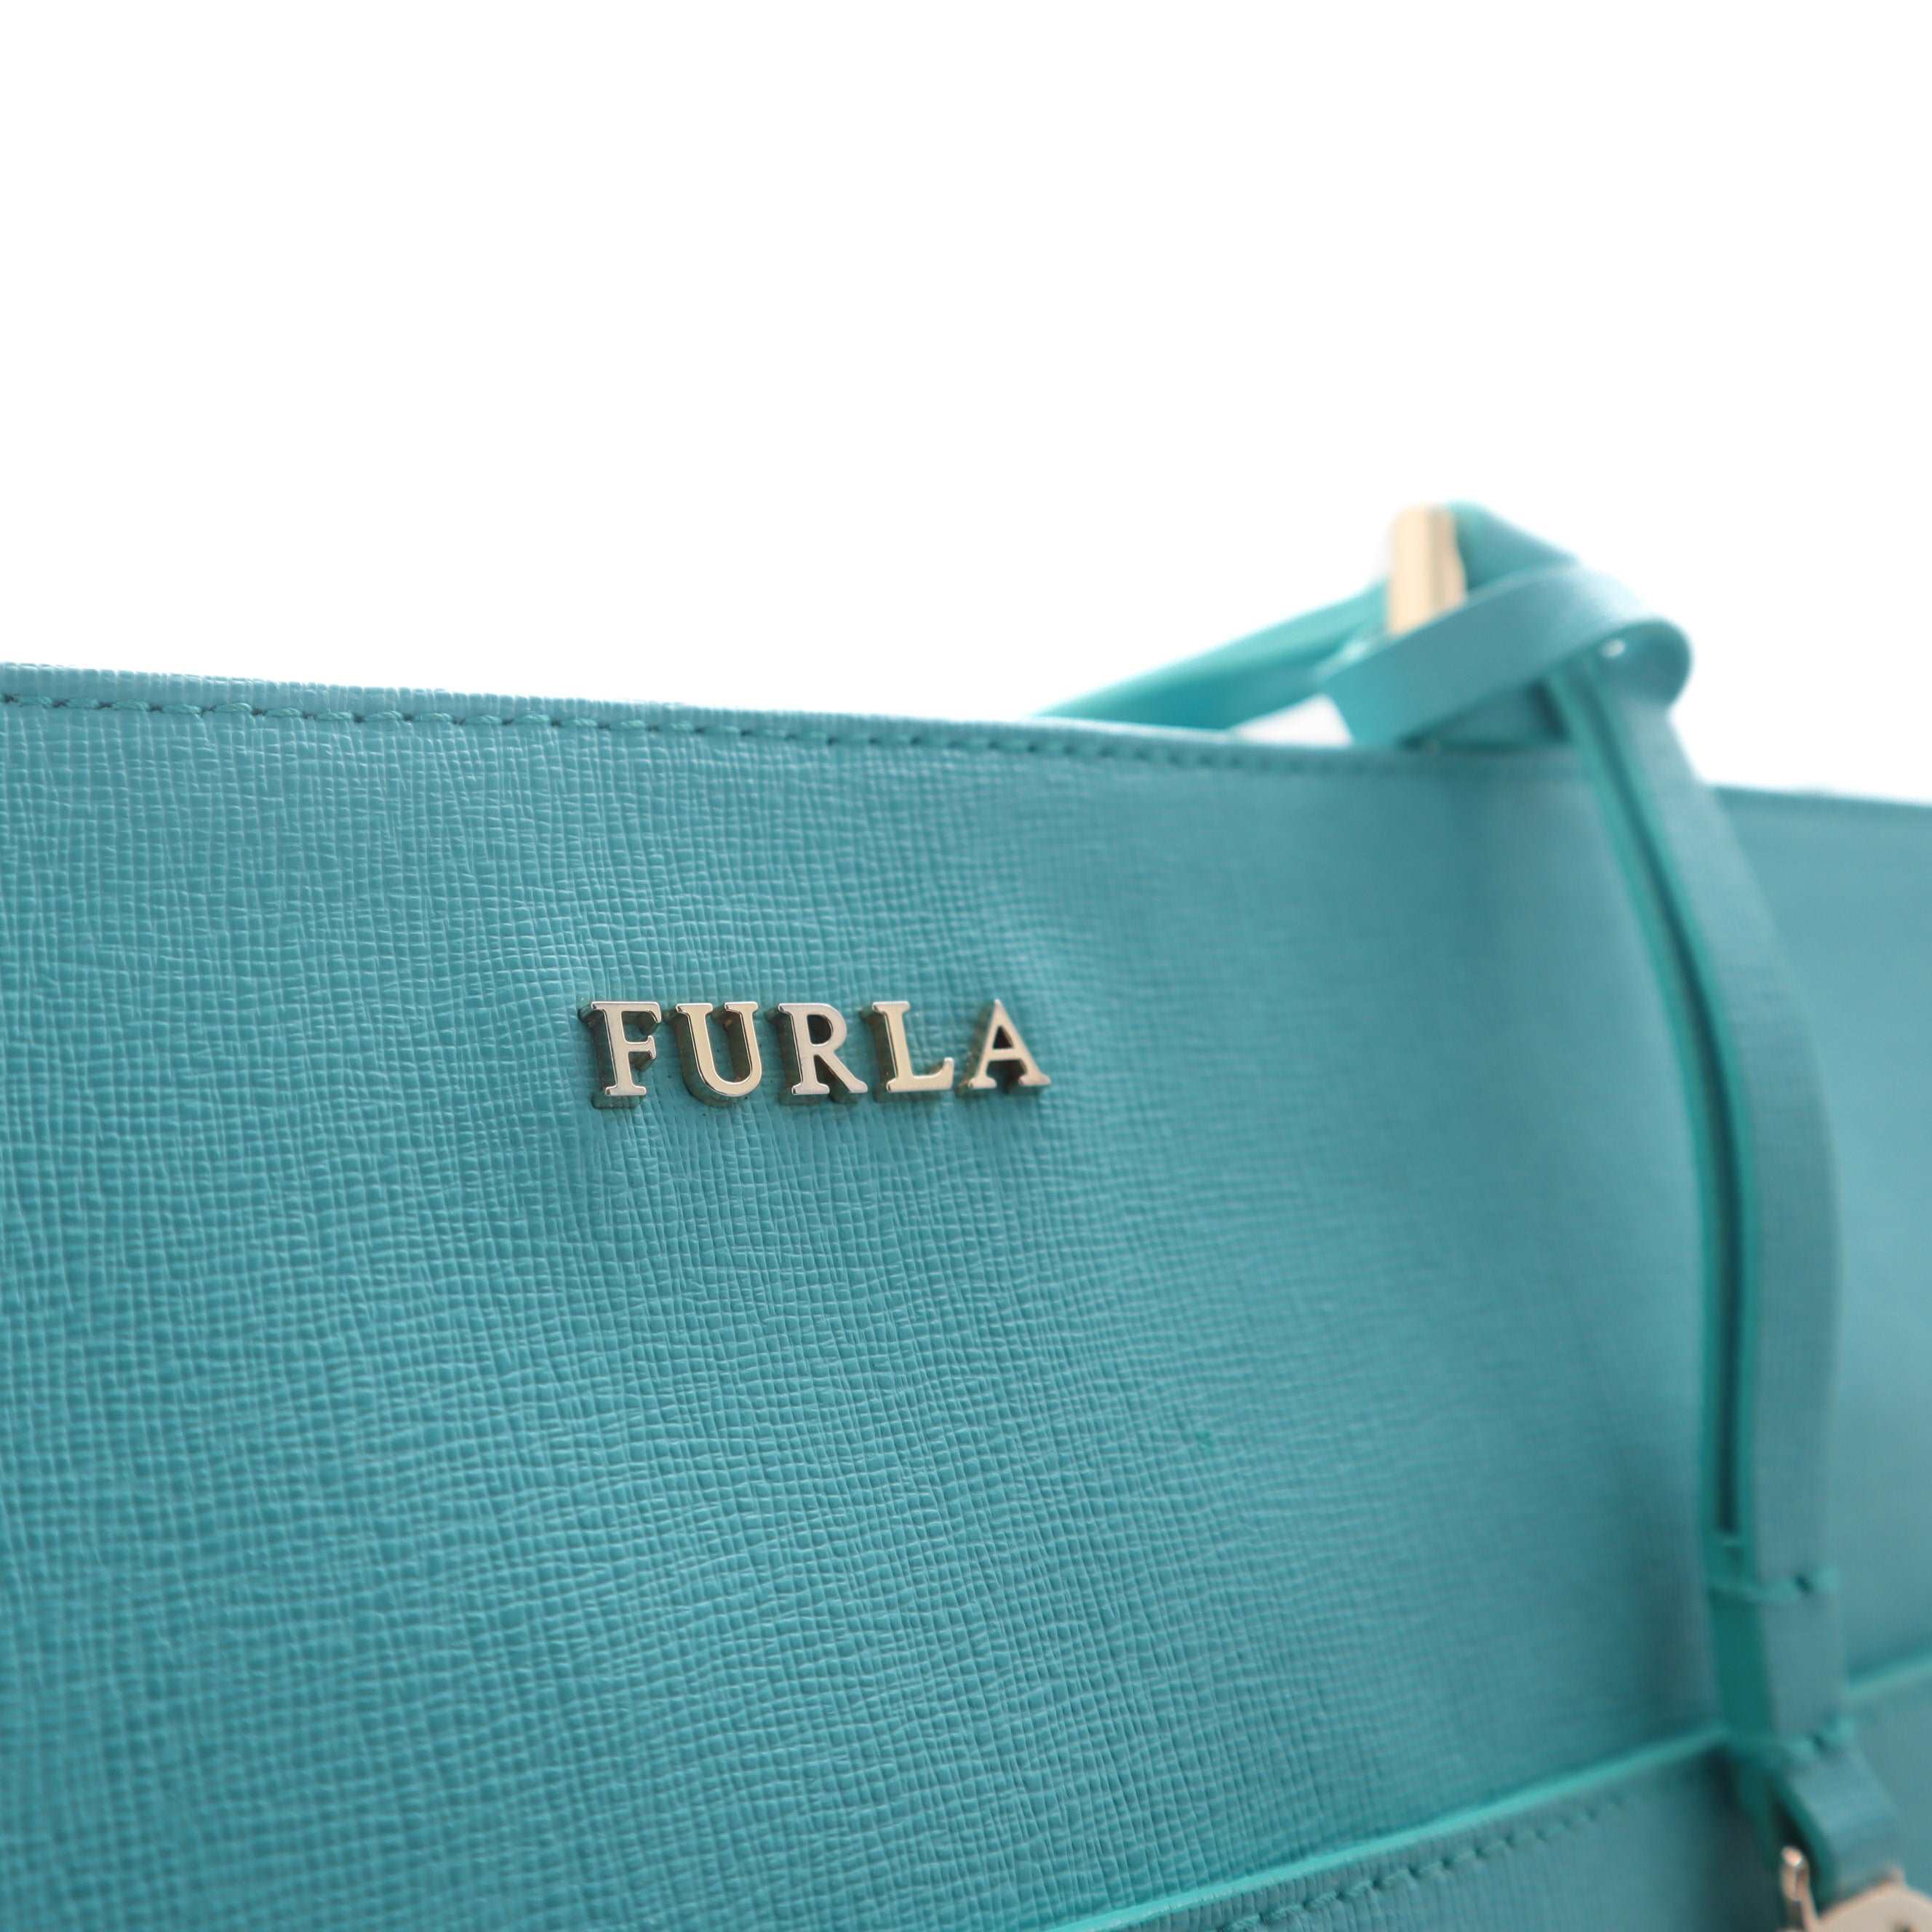 Furla Turquoise Saffiano Leather Tote - ÉPROUVÉE Preowned Luxury Fashion